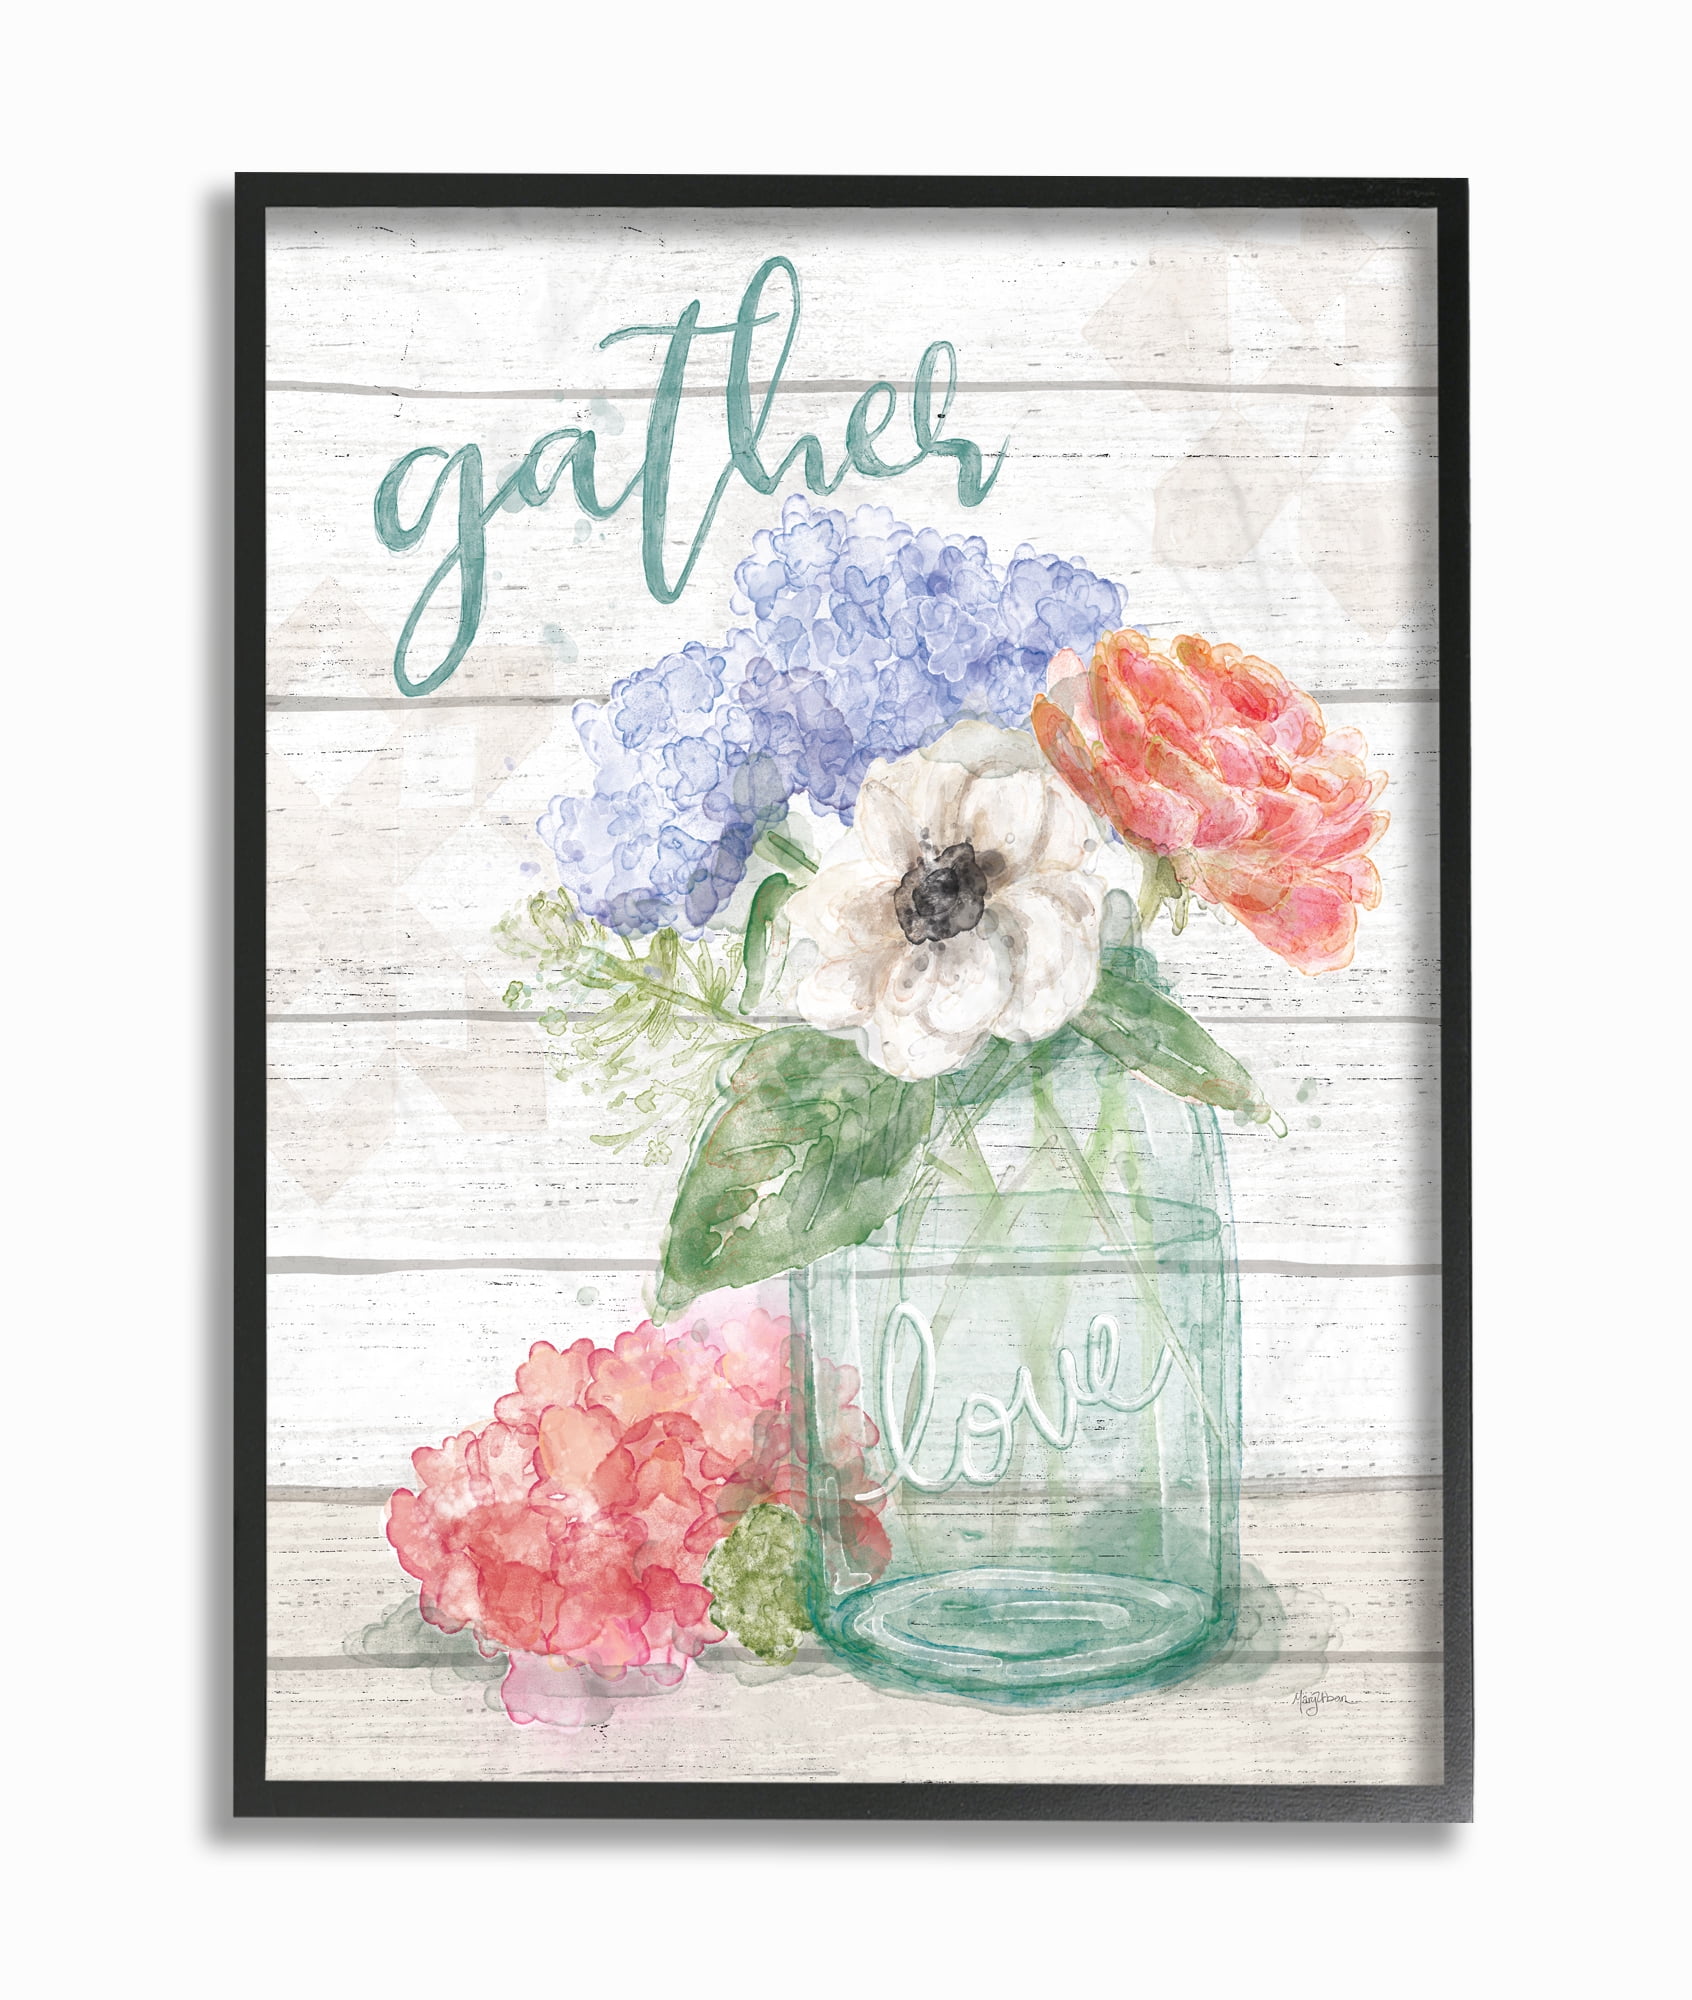 10 x 15 Design by Artist Mary Urban Stupell Industries Gather Love Flower Jar Rustic Wood Textured Word Wall Plaque